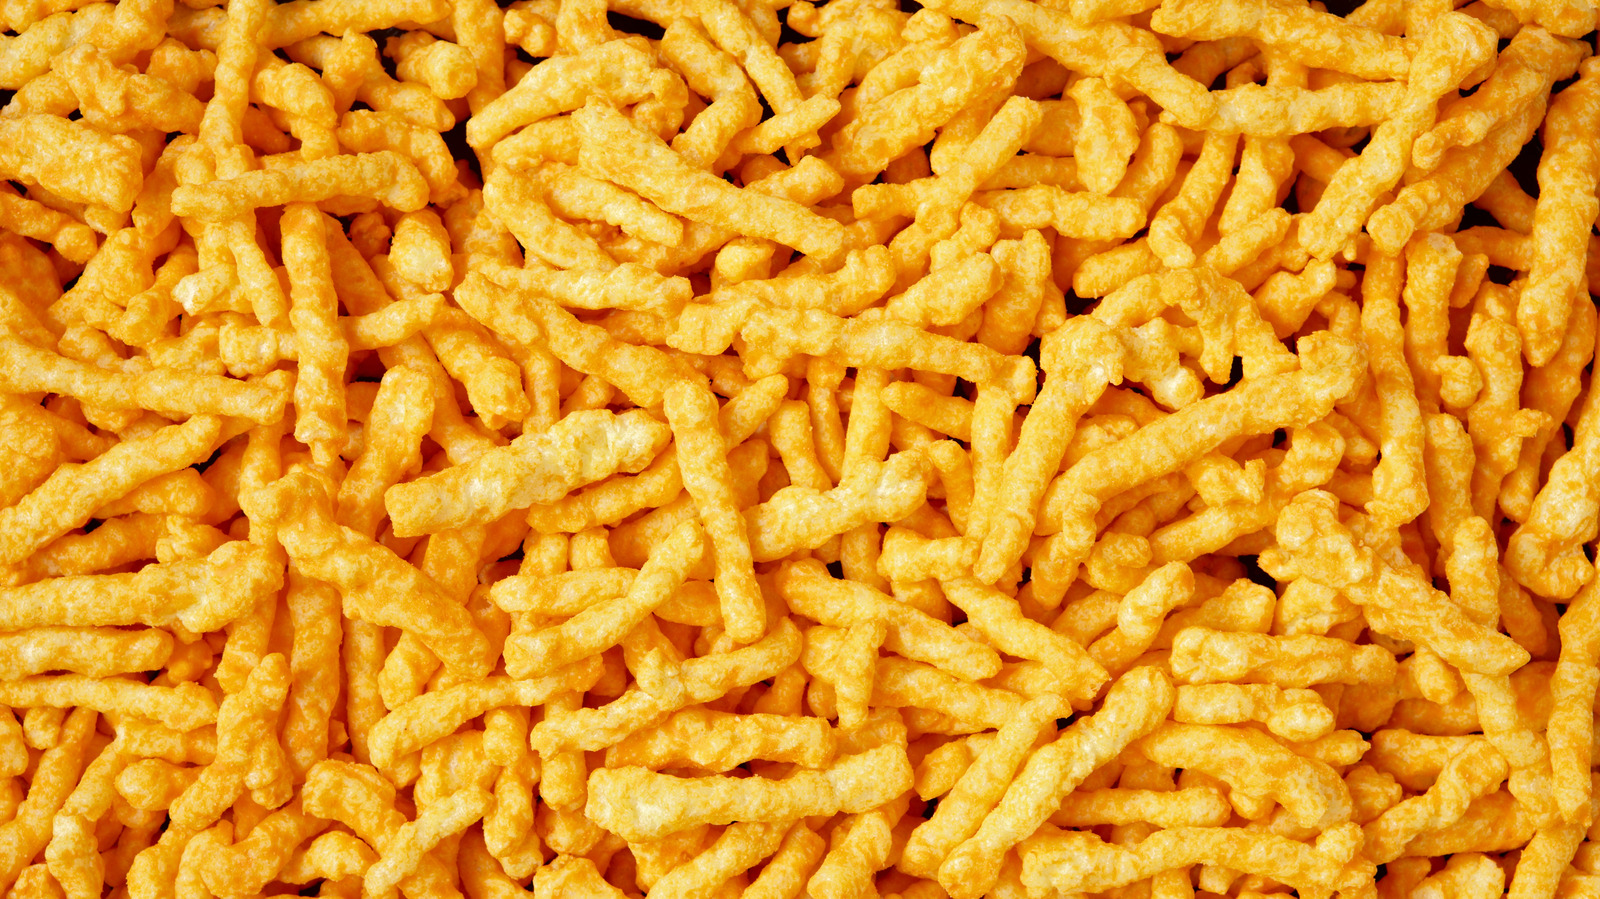 Cheetos Duster - Turn Cheetos Into The Perfect Ingredient for All Your Recipes